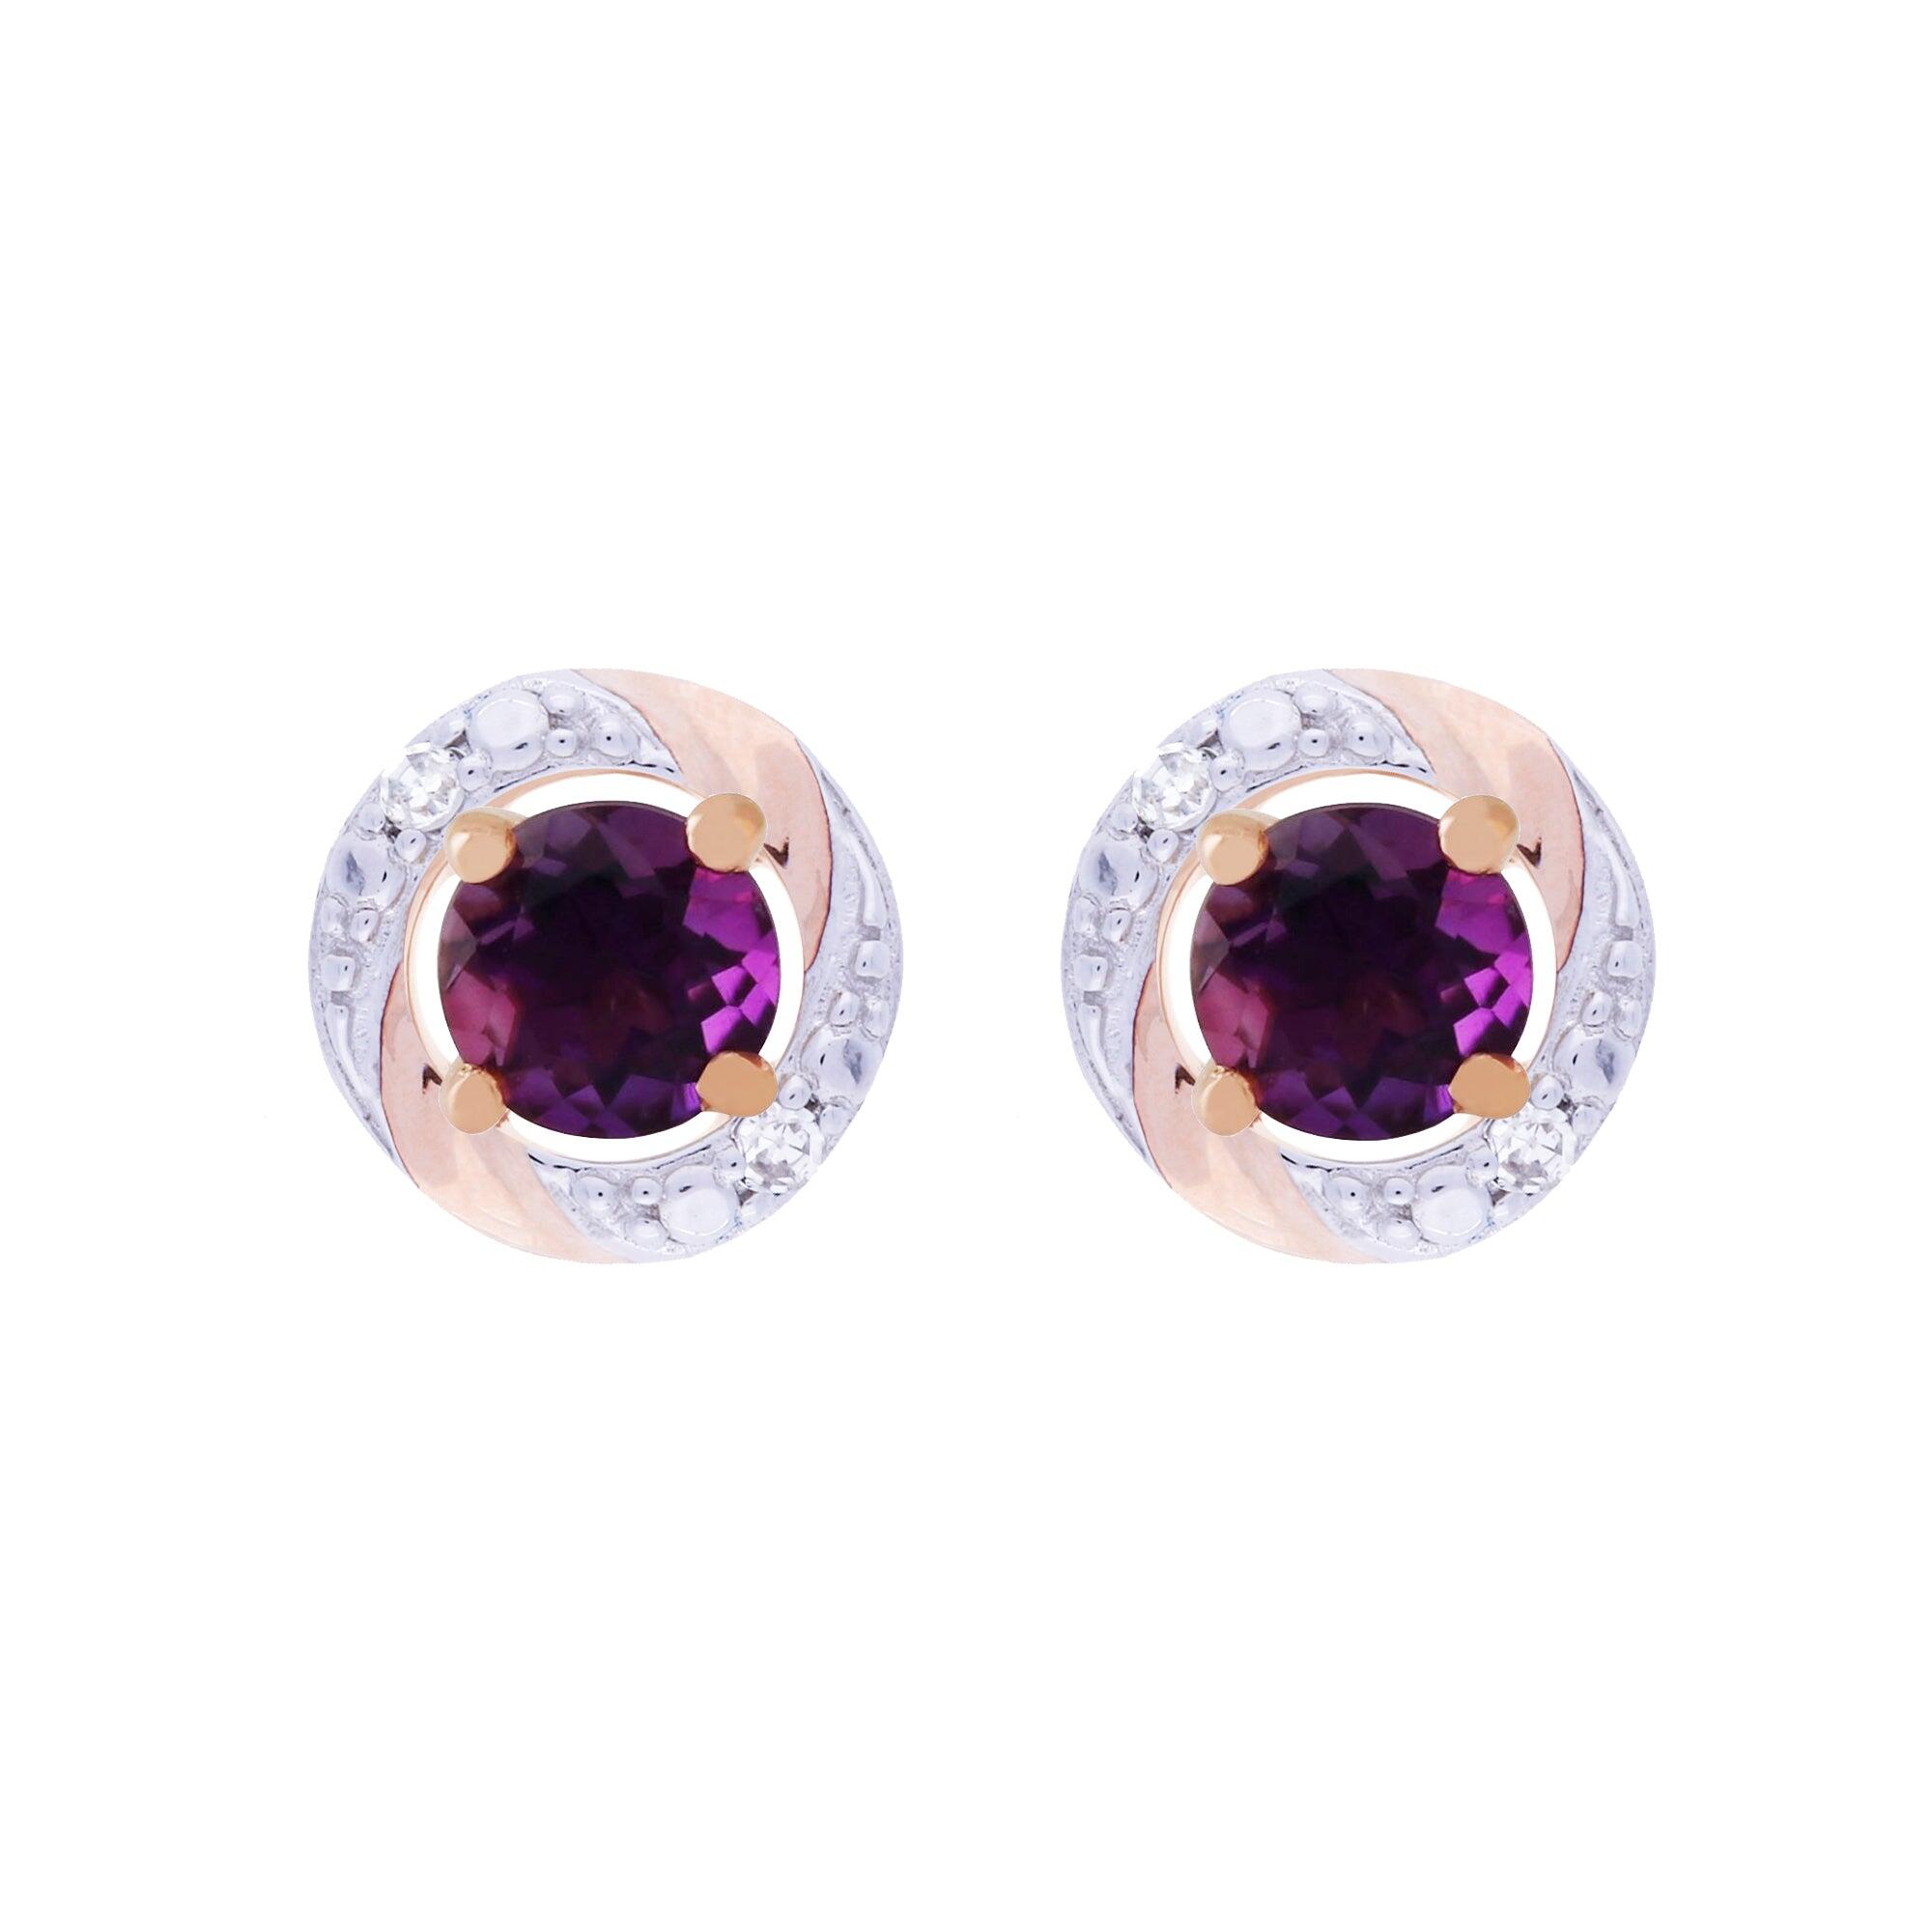 Classic Round Amethyst Stud Earrings with Detachable Diamond Round Earrings Jacket Set in 9ct Rose Gold